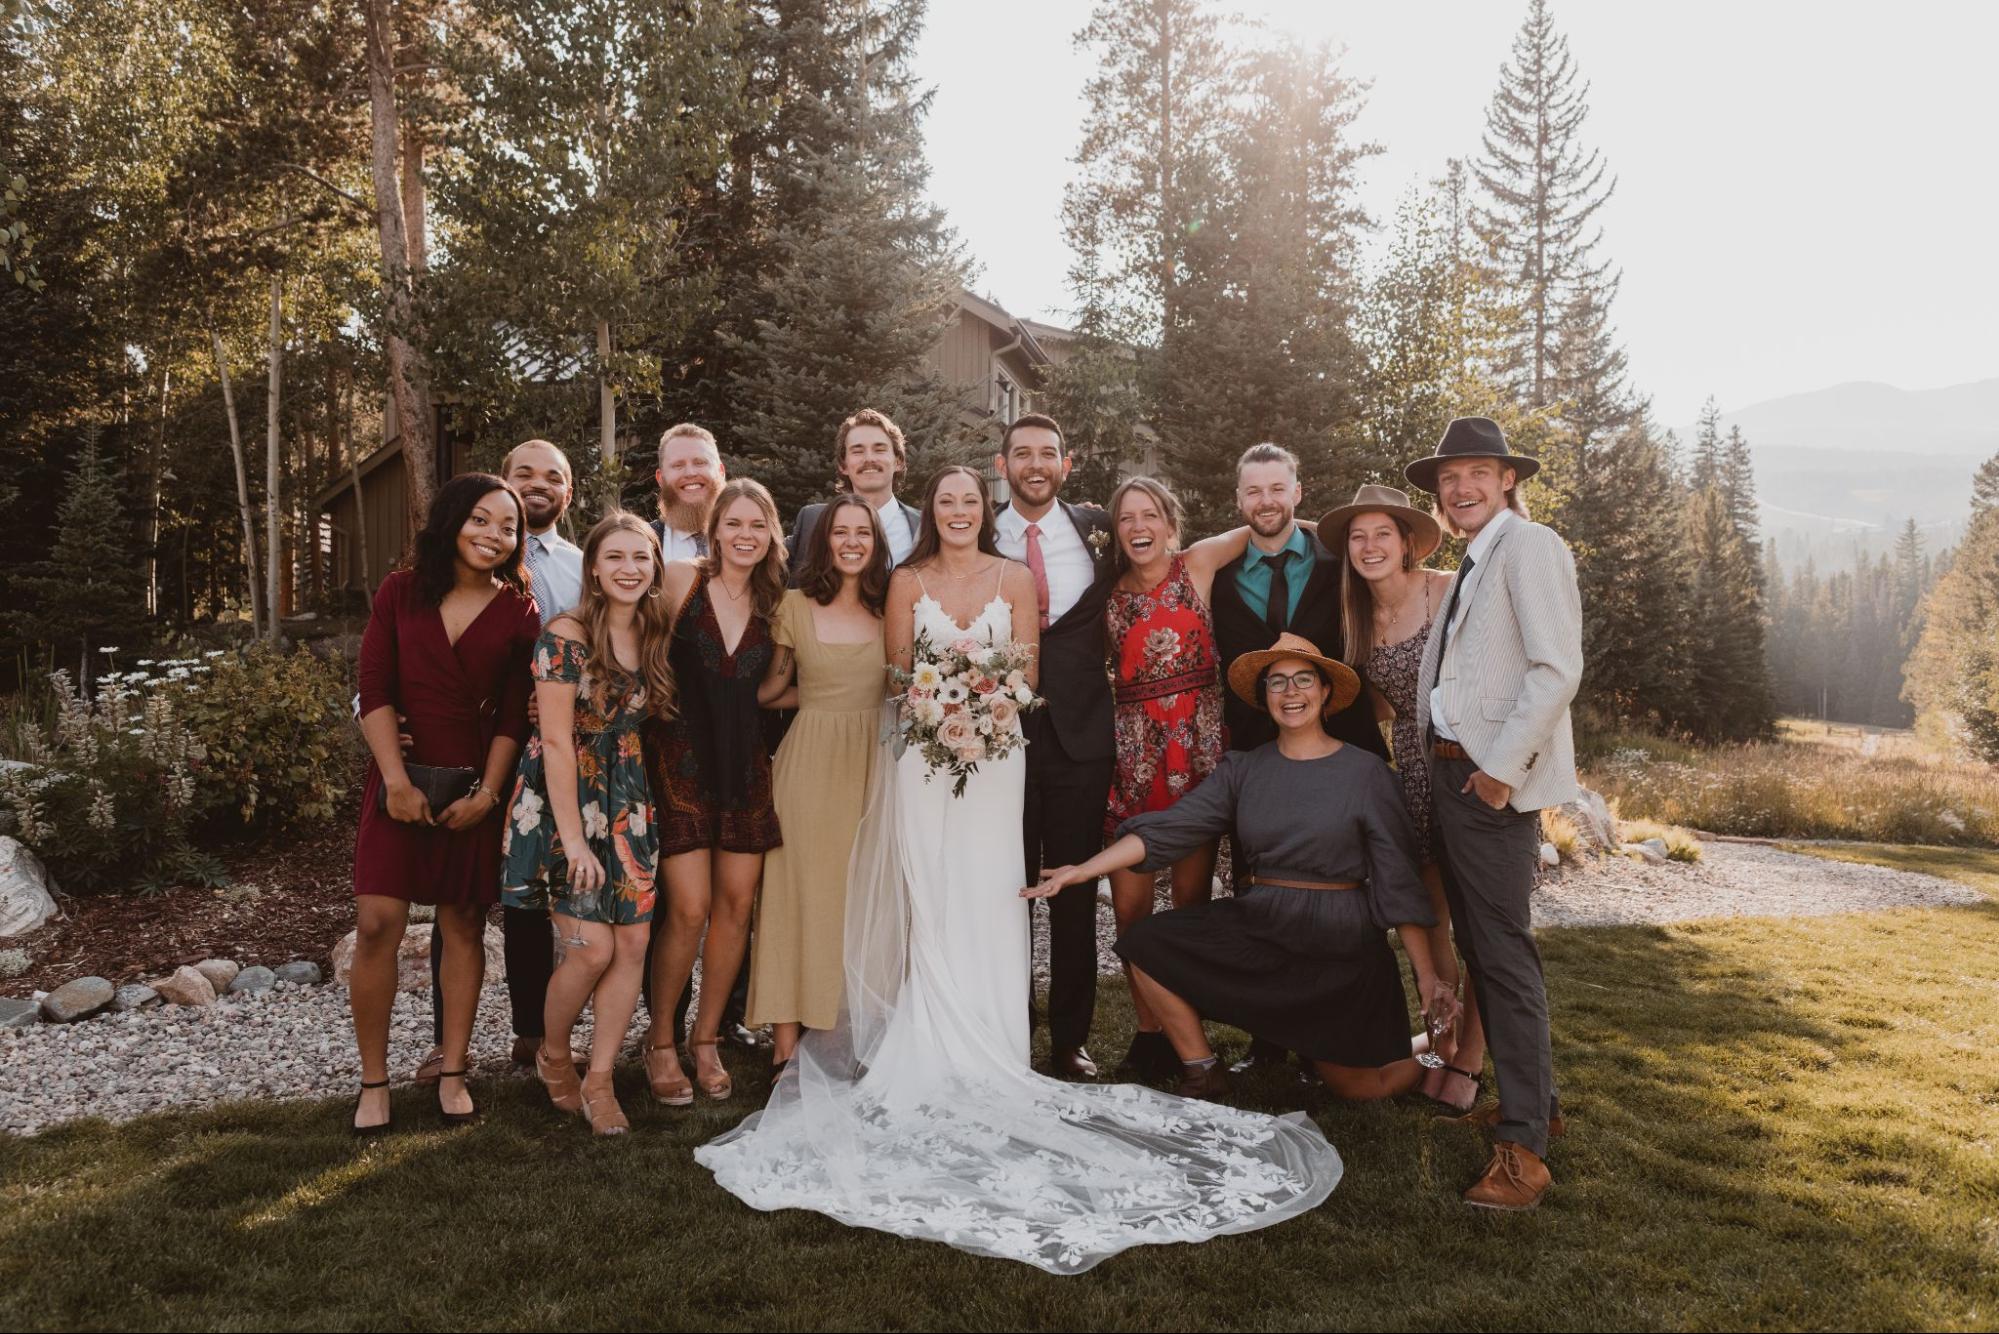 Sarah and Rob at their wedding in Breckenridge with several of their BOEC friends.